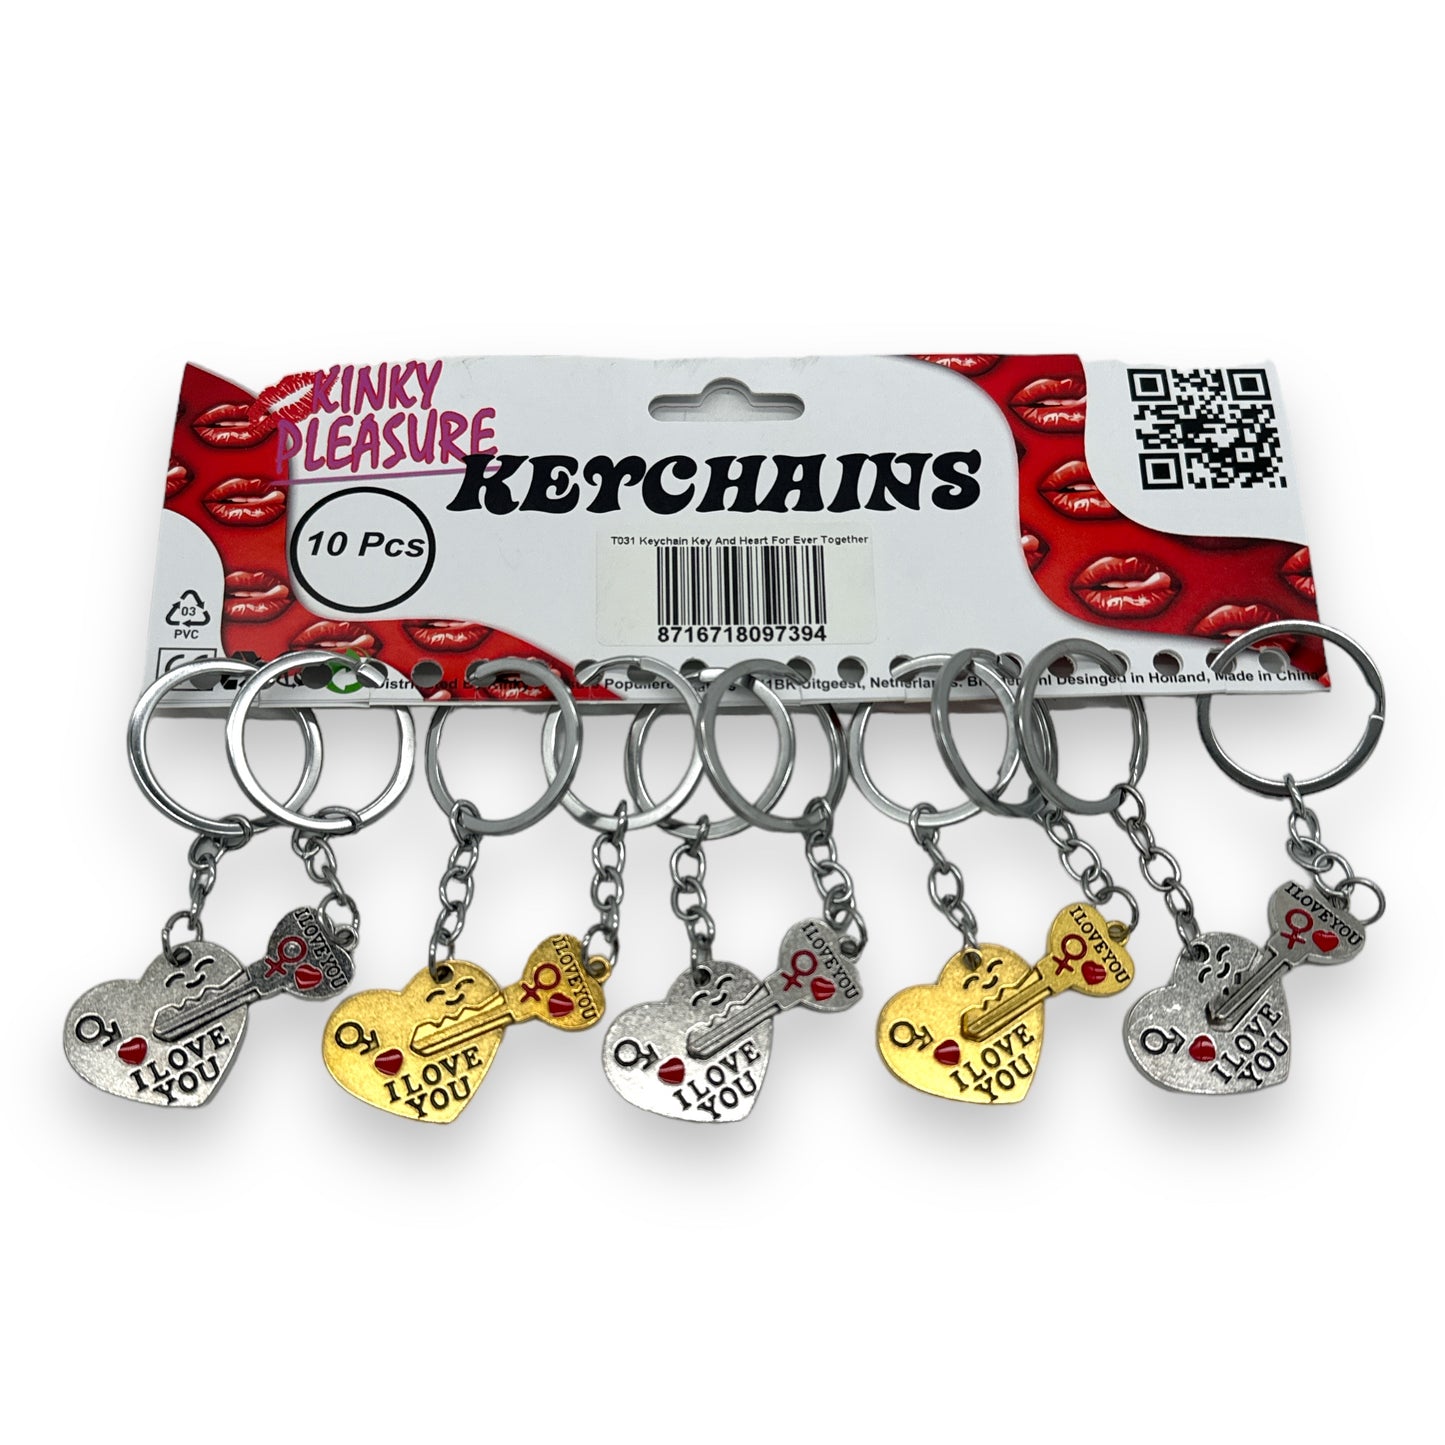 Kinky Pleasure - T031 - Keychain Key And Heart For Ever Together - 2 Models